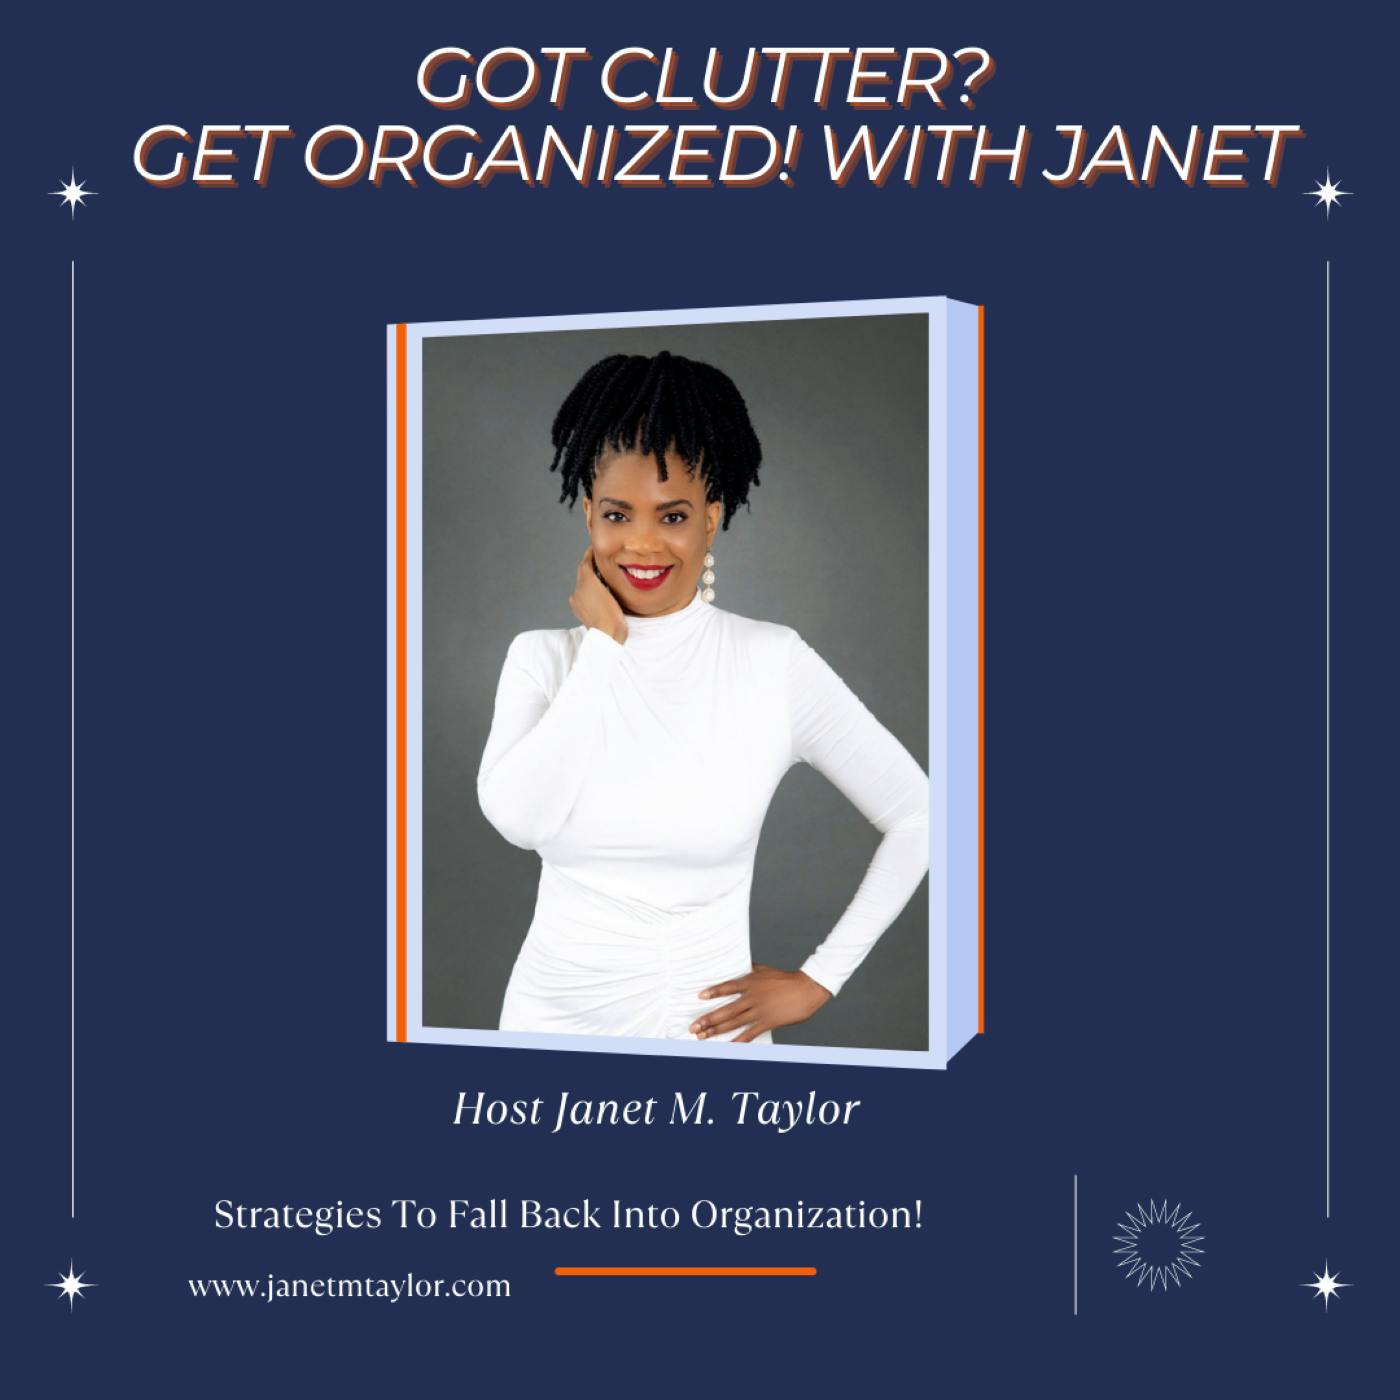 Strategies To Fall Back Into Organization with Janet